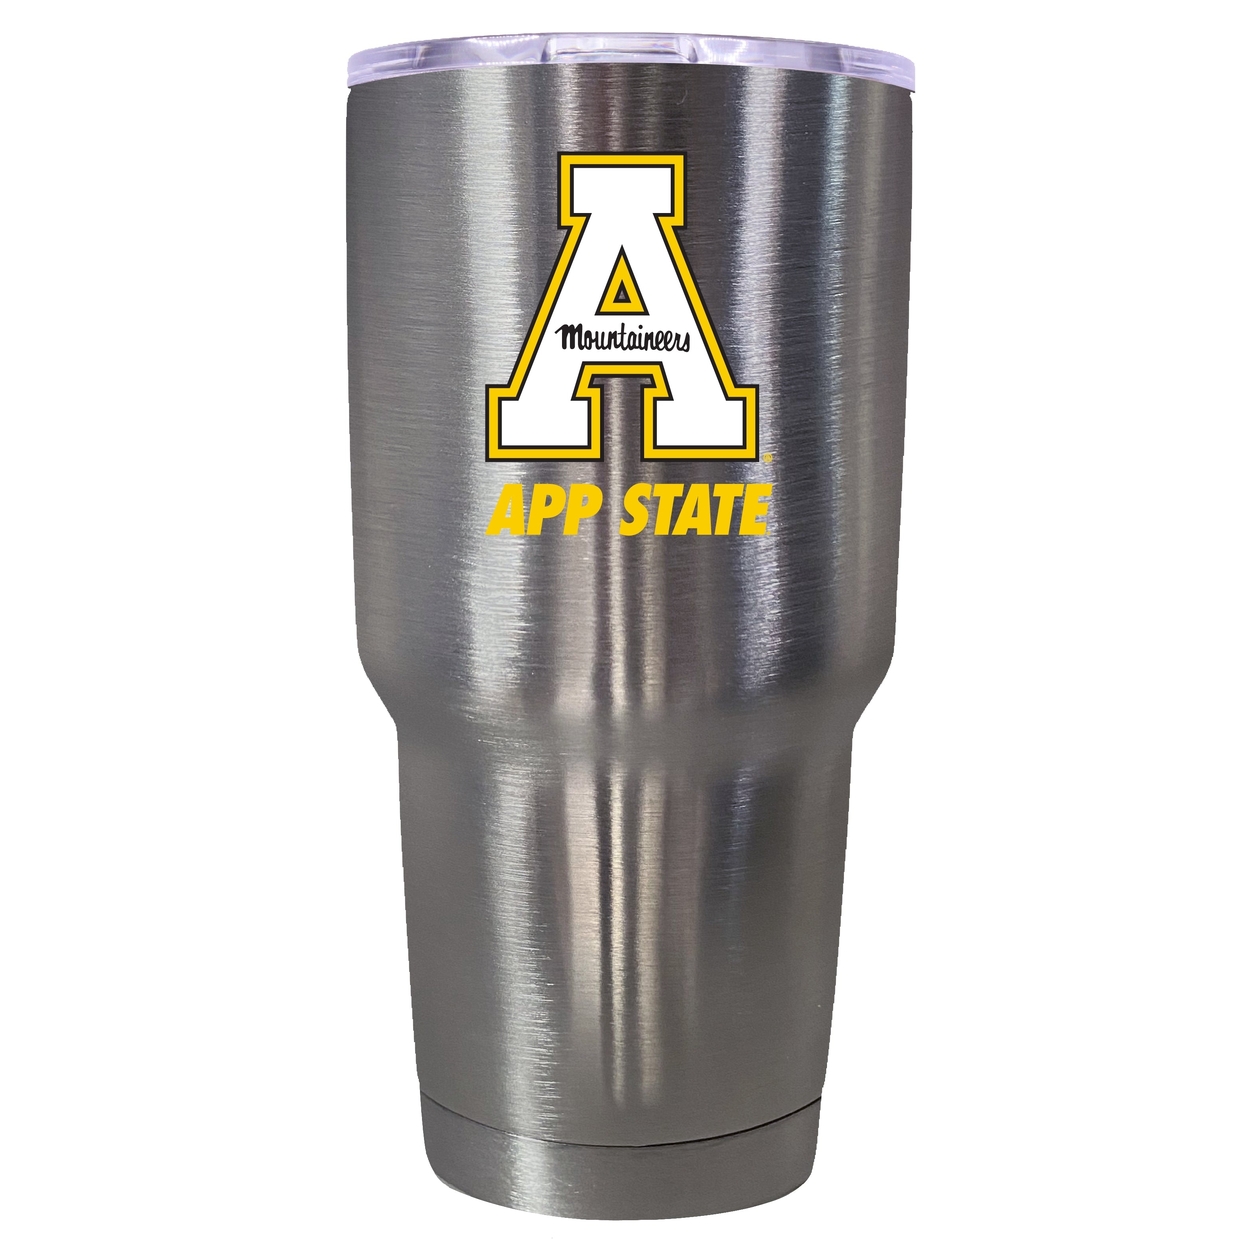 Appalachian State 24 Oz Insulated Stainless Steel Tumbler